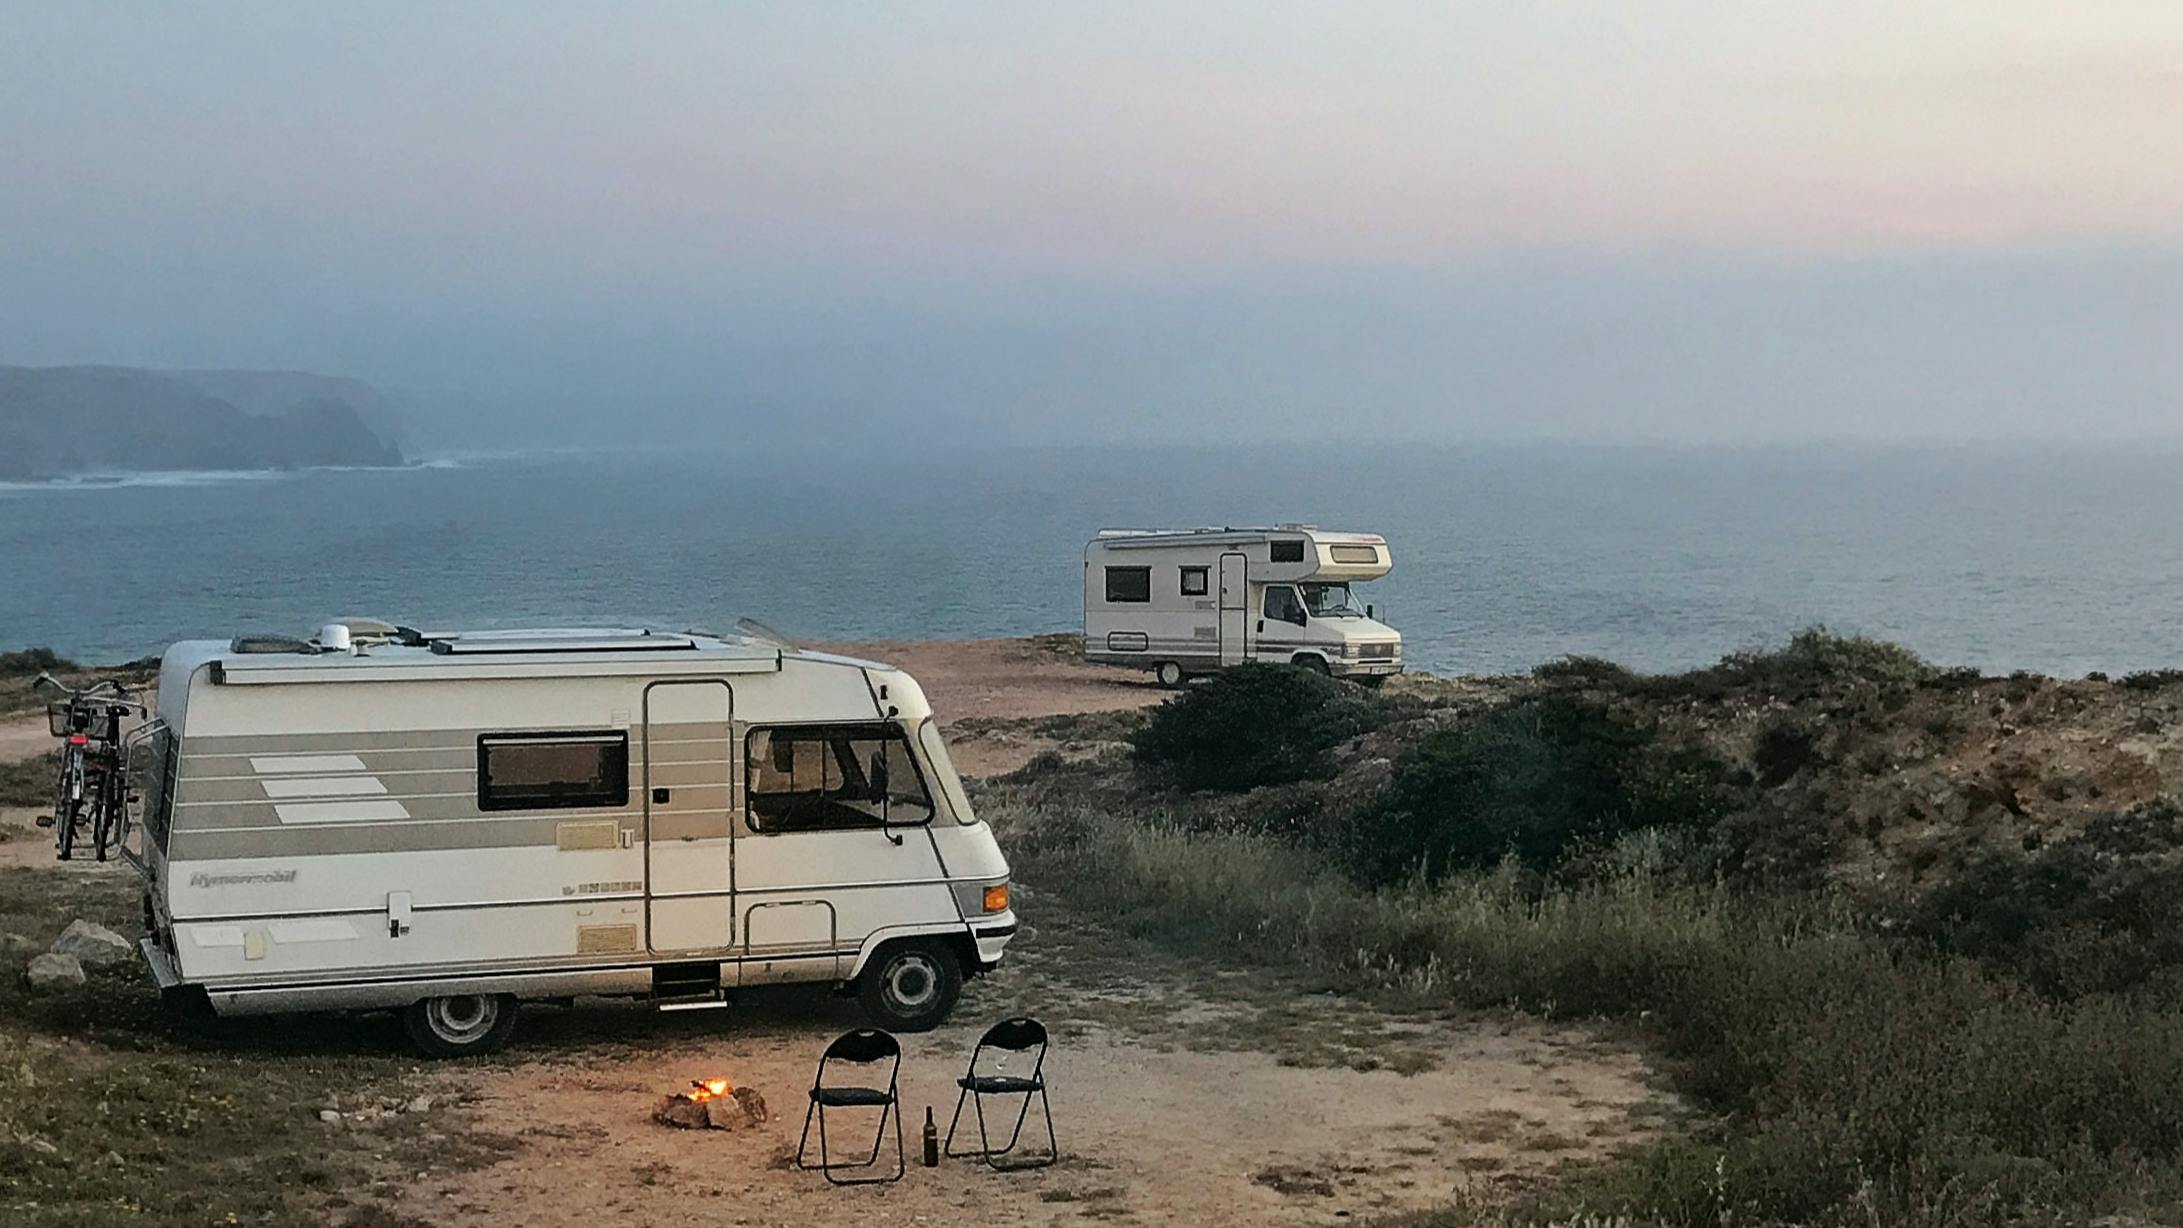 Two RVs are parked on an overlook along the coast. Next to one RV are two folding chairs and a campfire. 